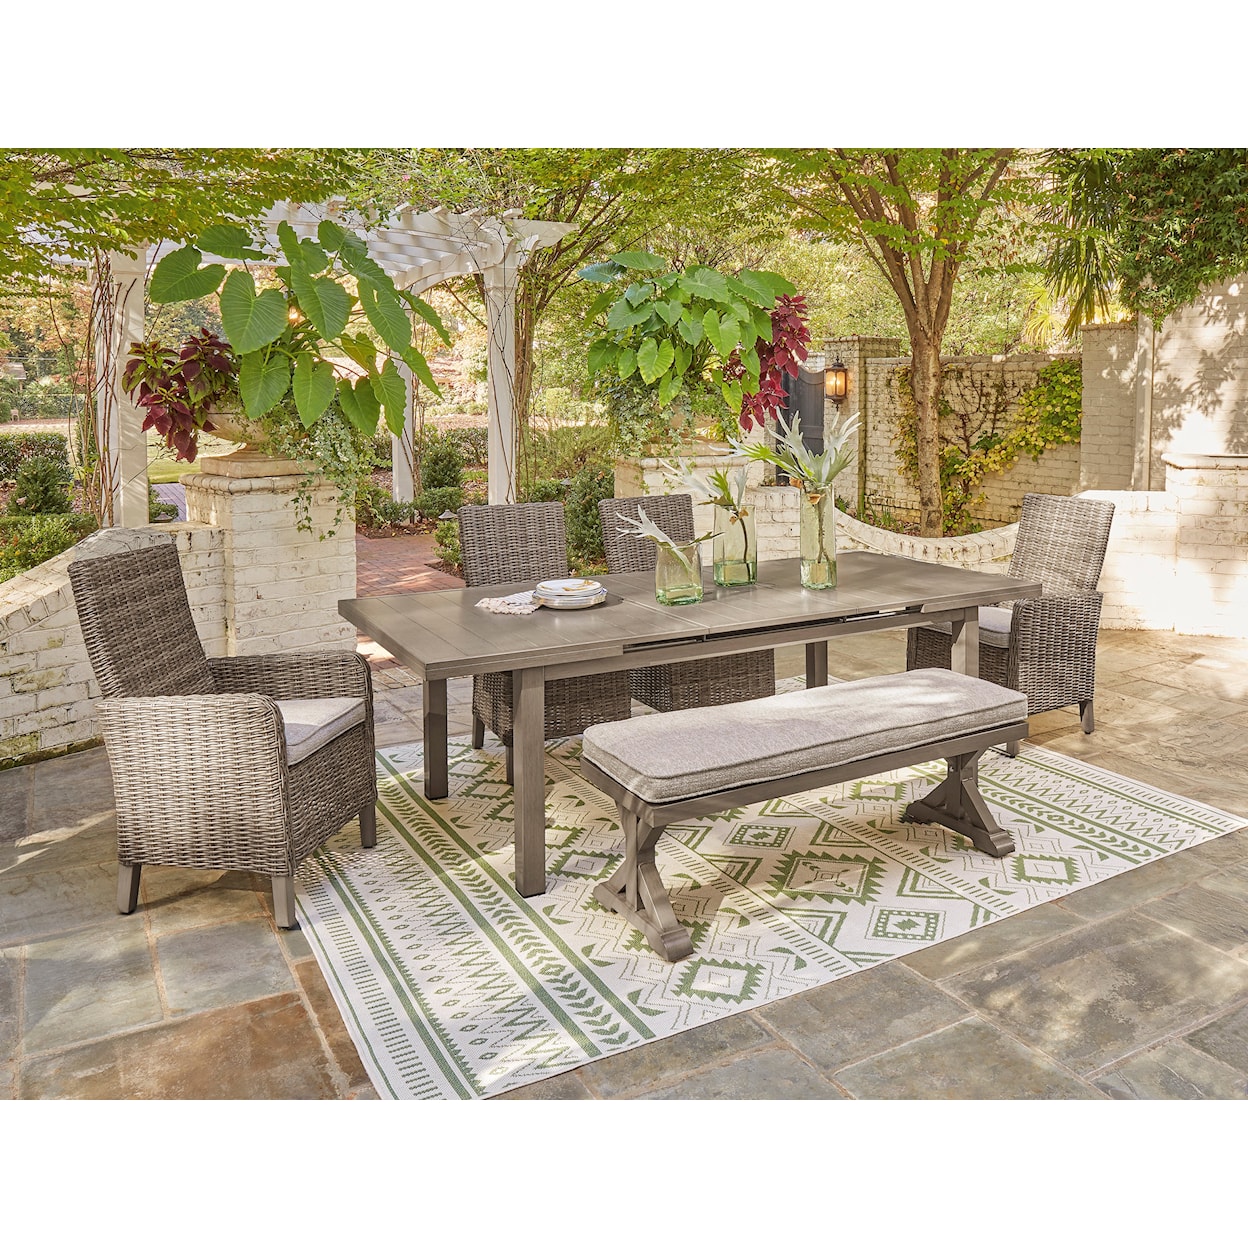 Ashley Furniture Signature Design Beach Front 6-Piece Outdoor Dining Set with Bench